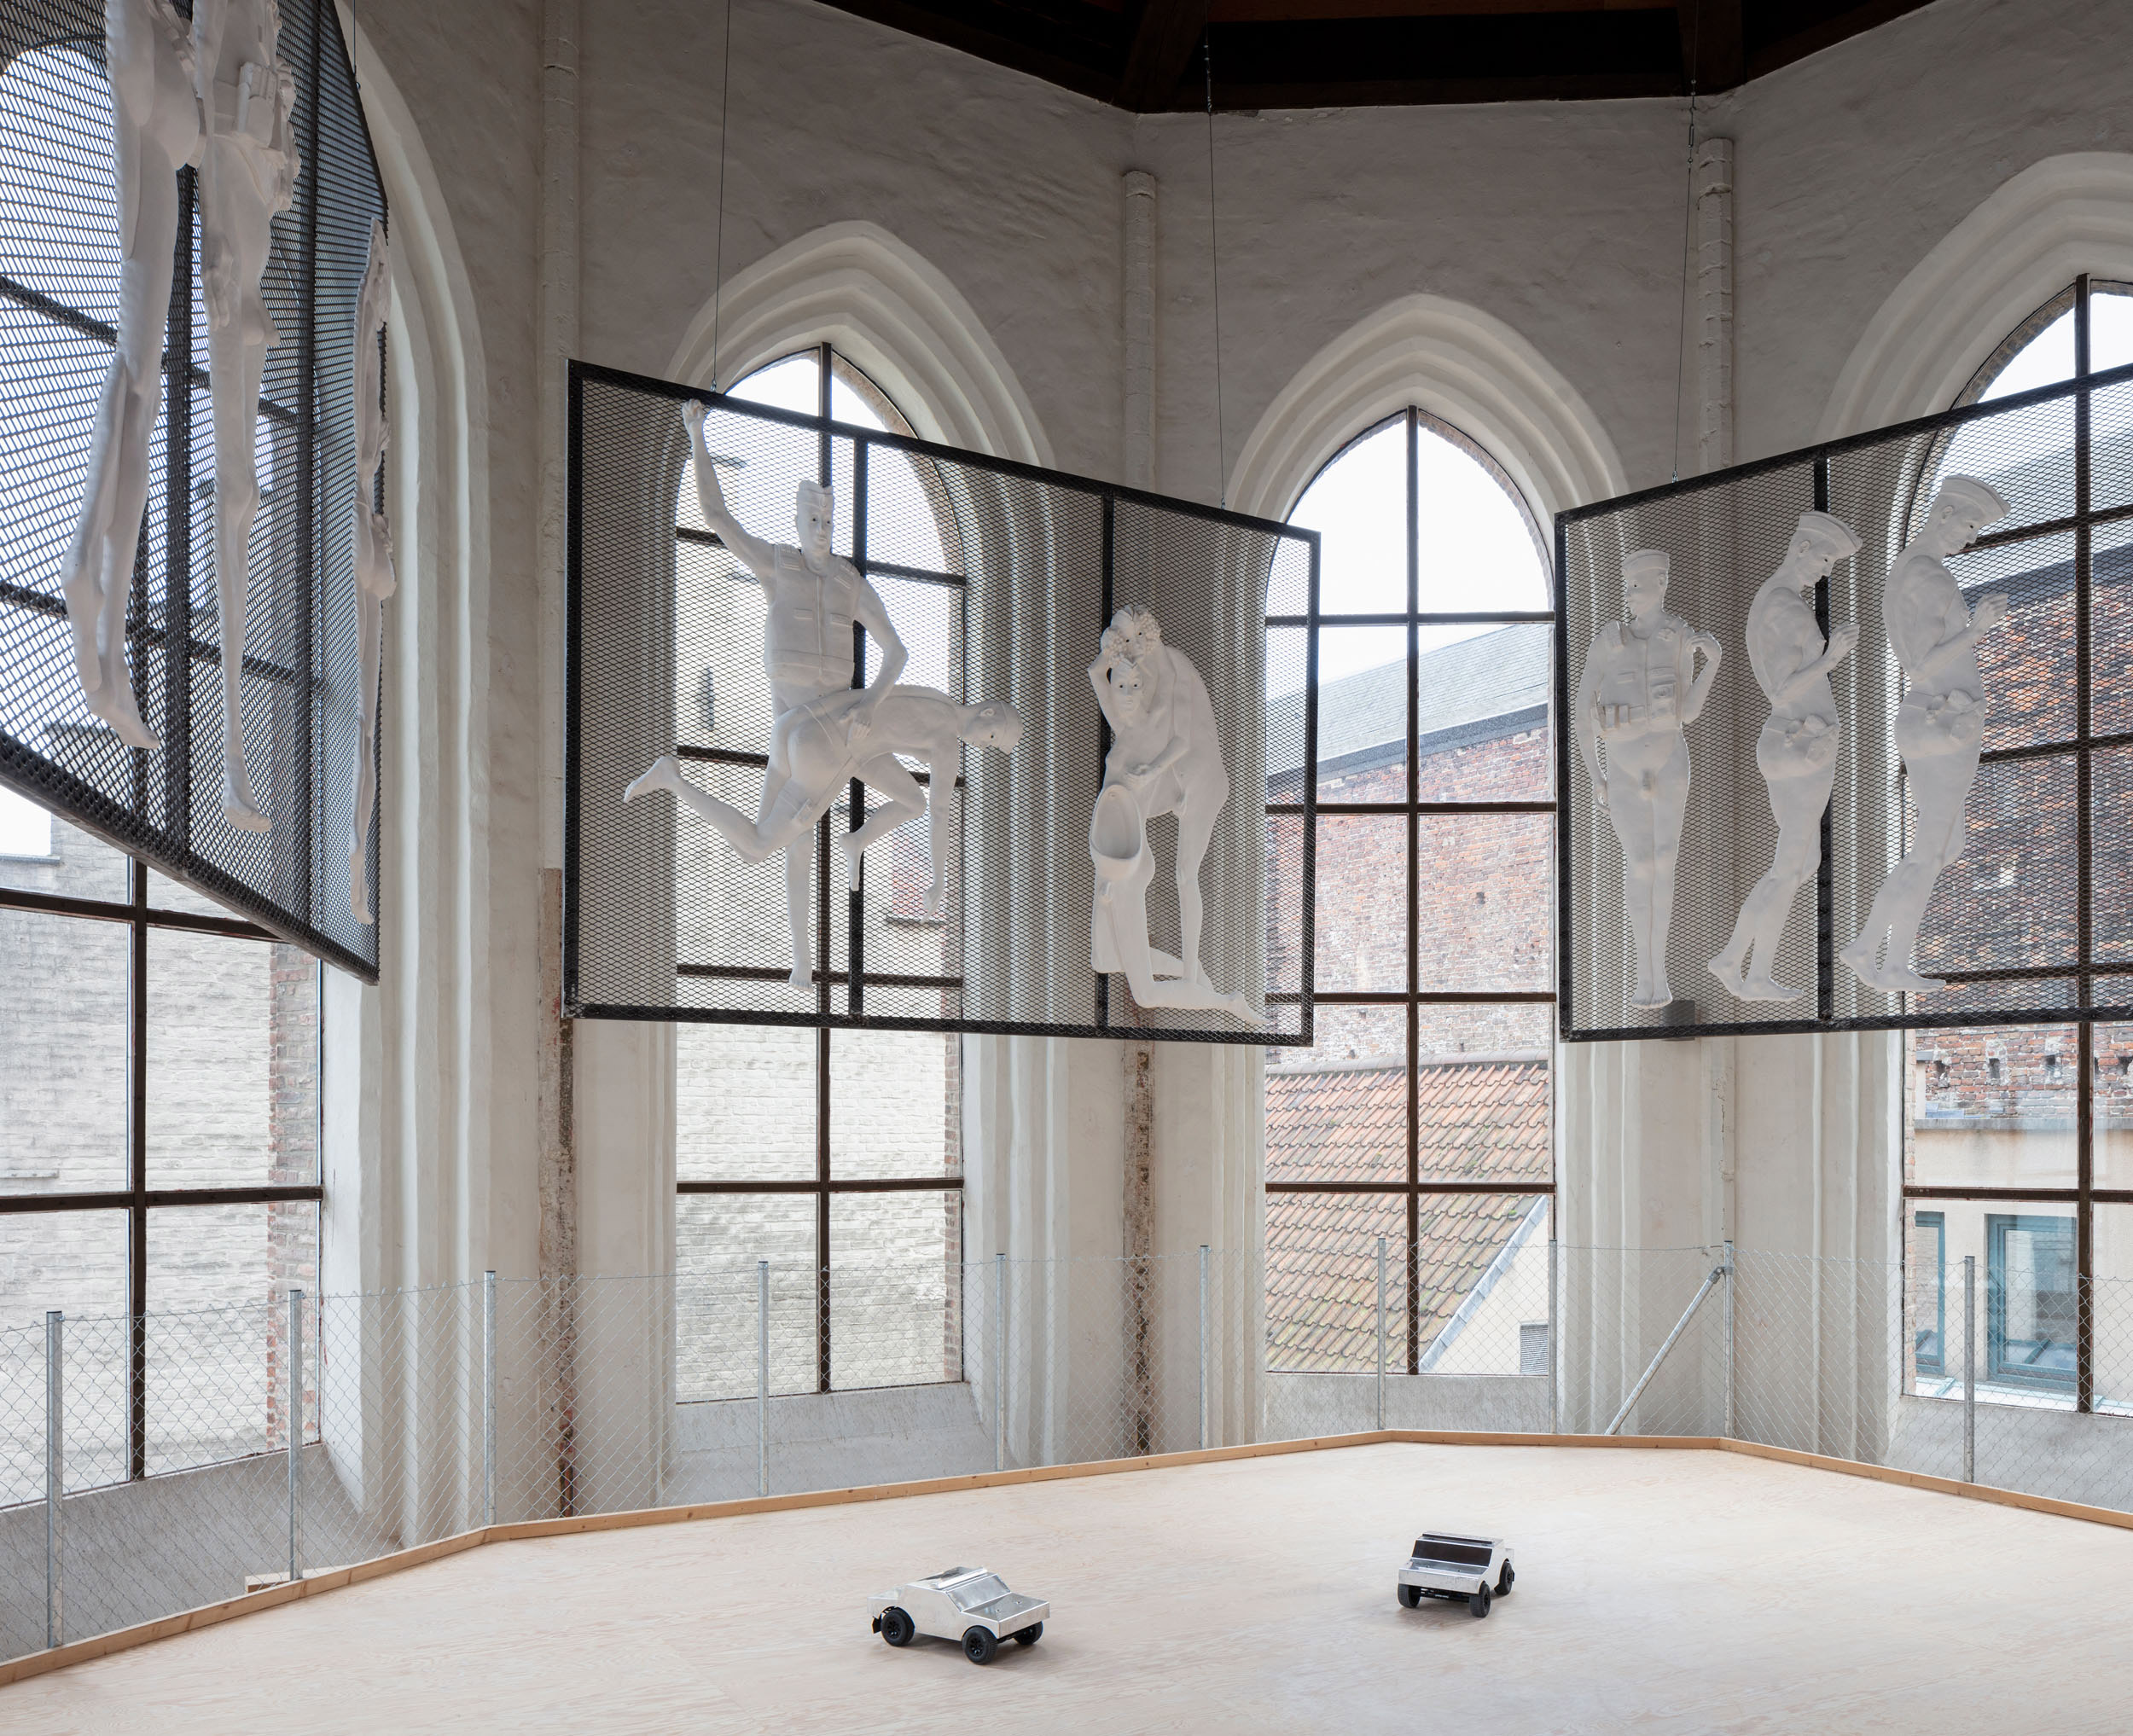 Aline Bouvy: "As Sirens Rise and Fall", Kunsthal Gent